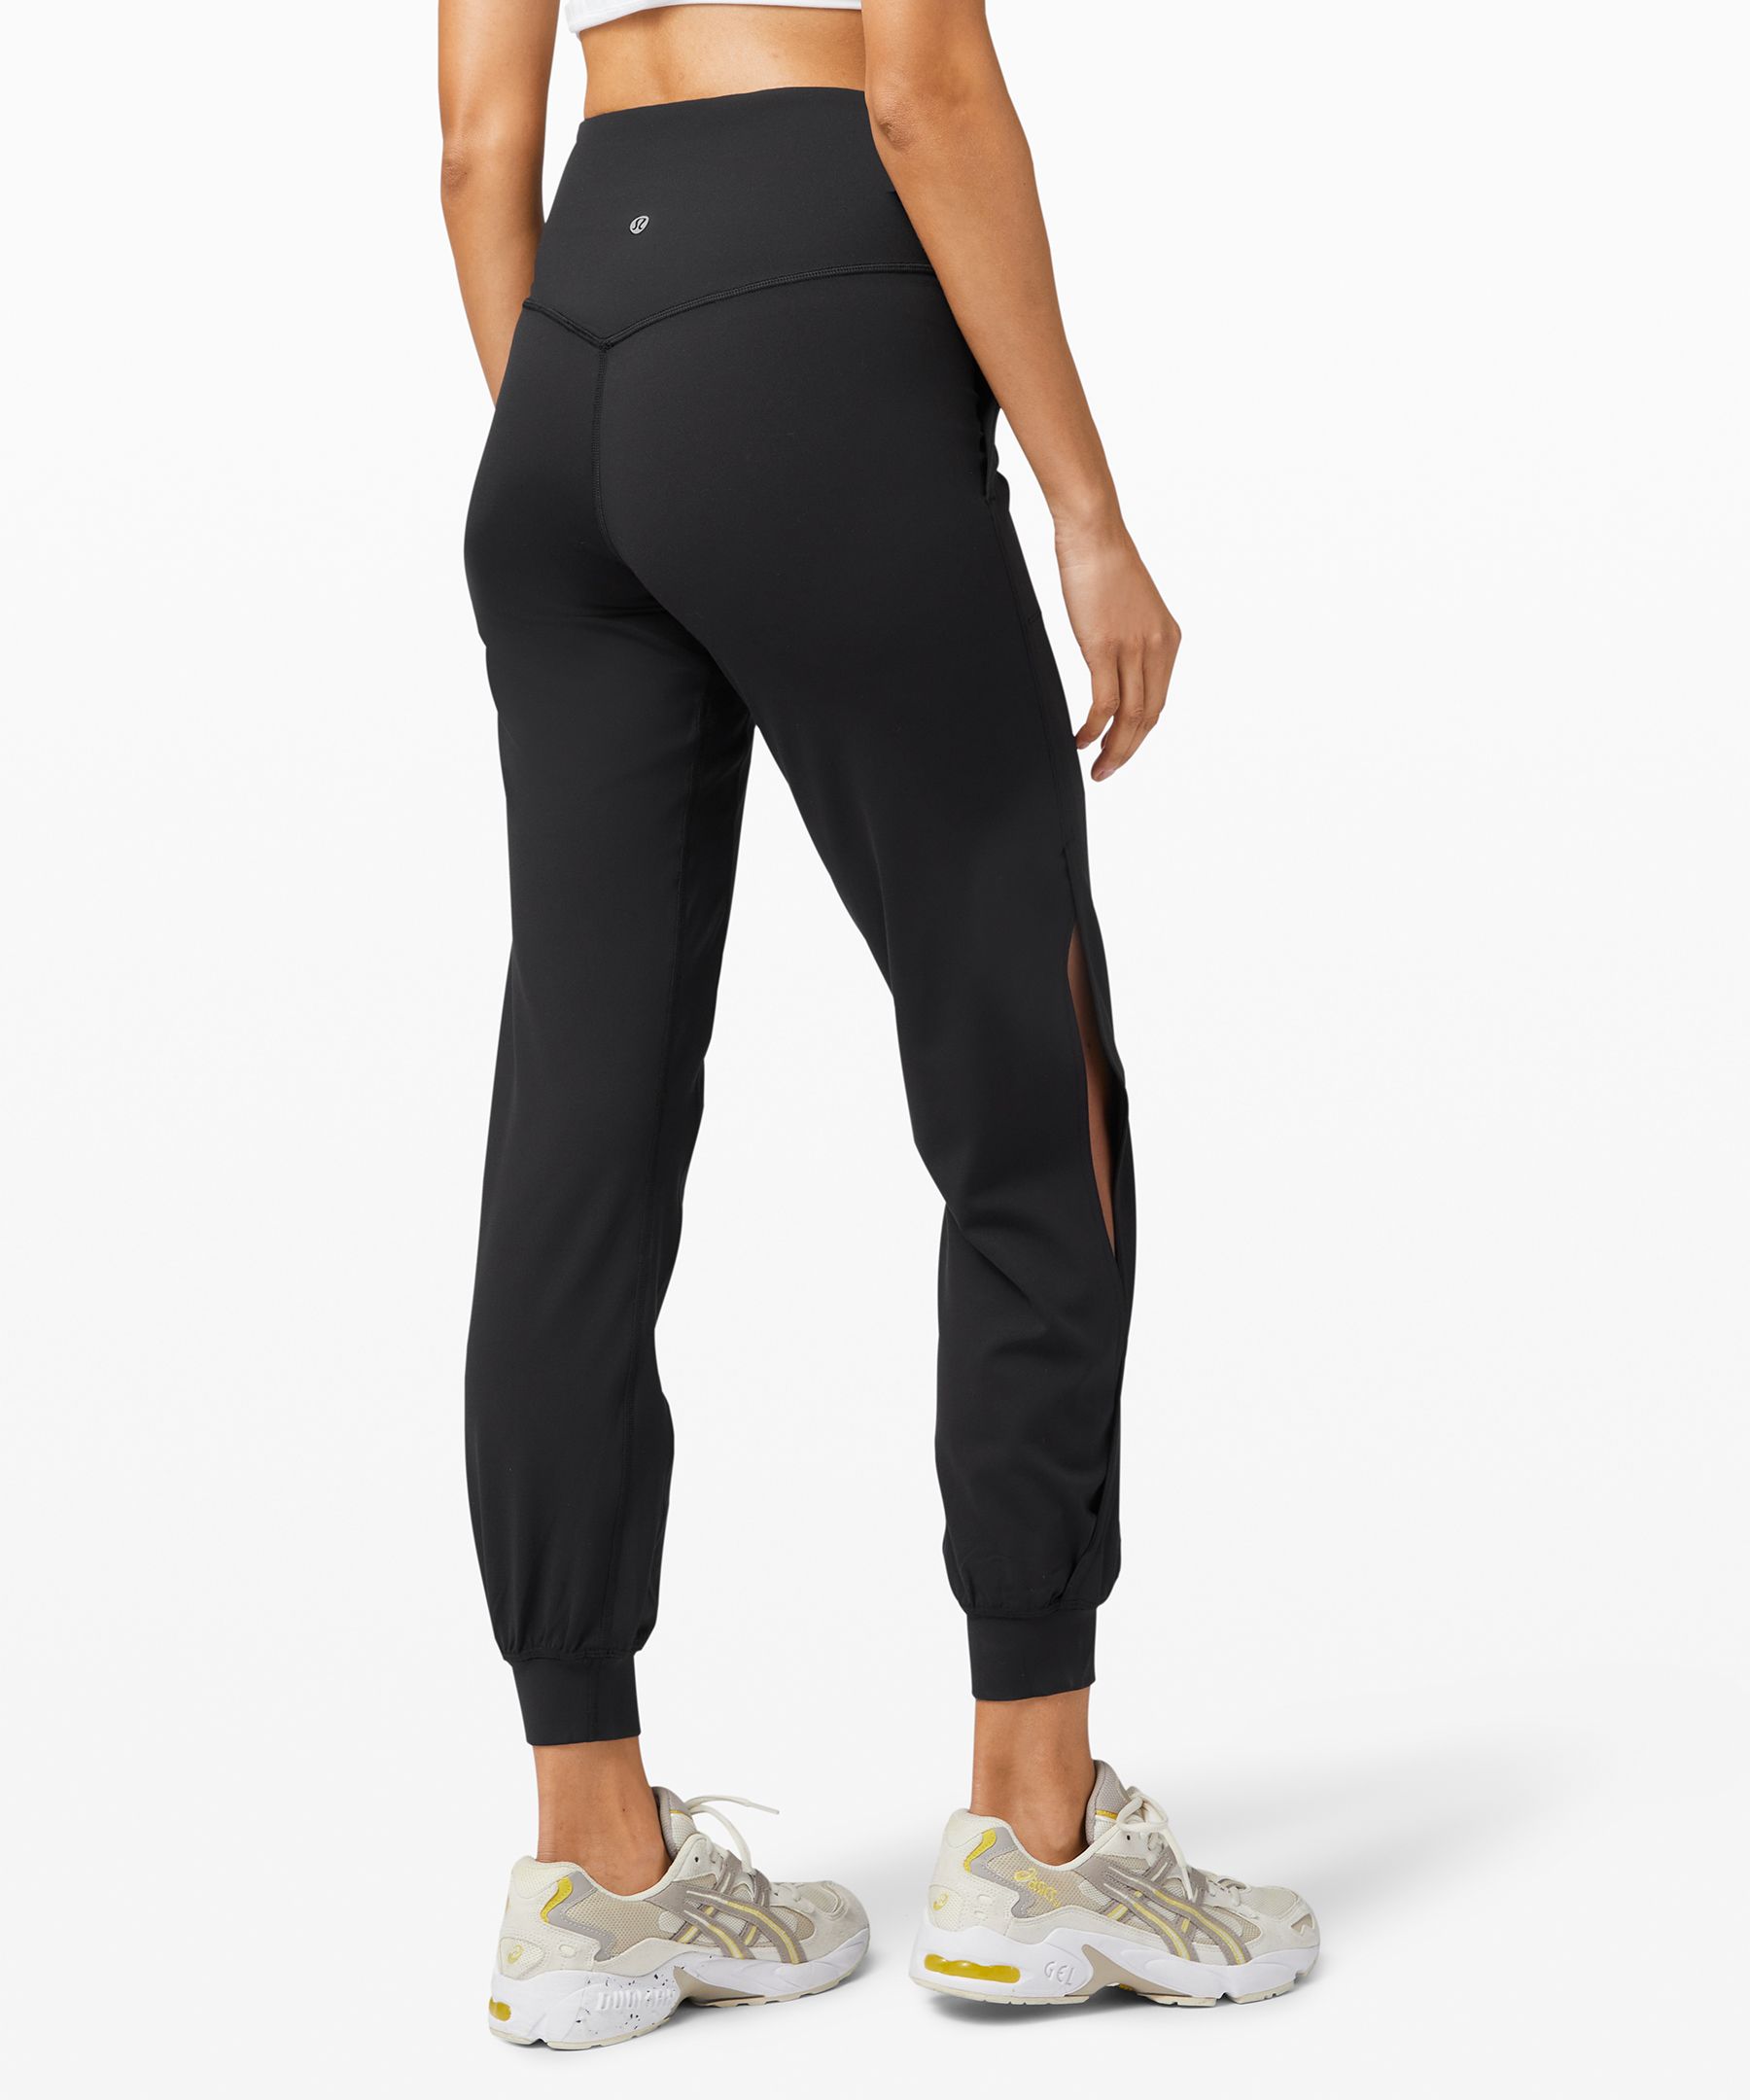 align joggers review